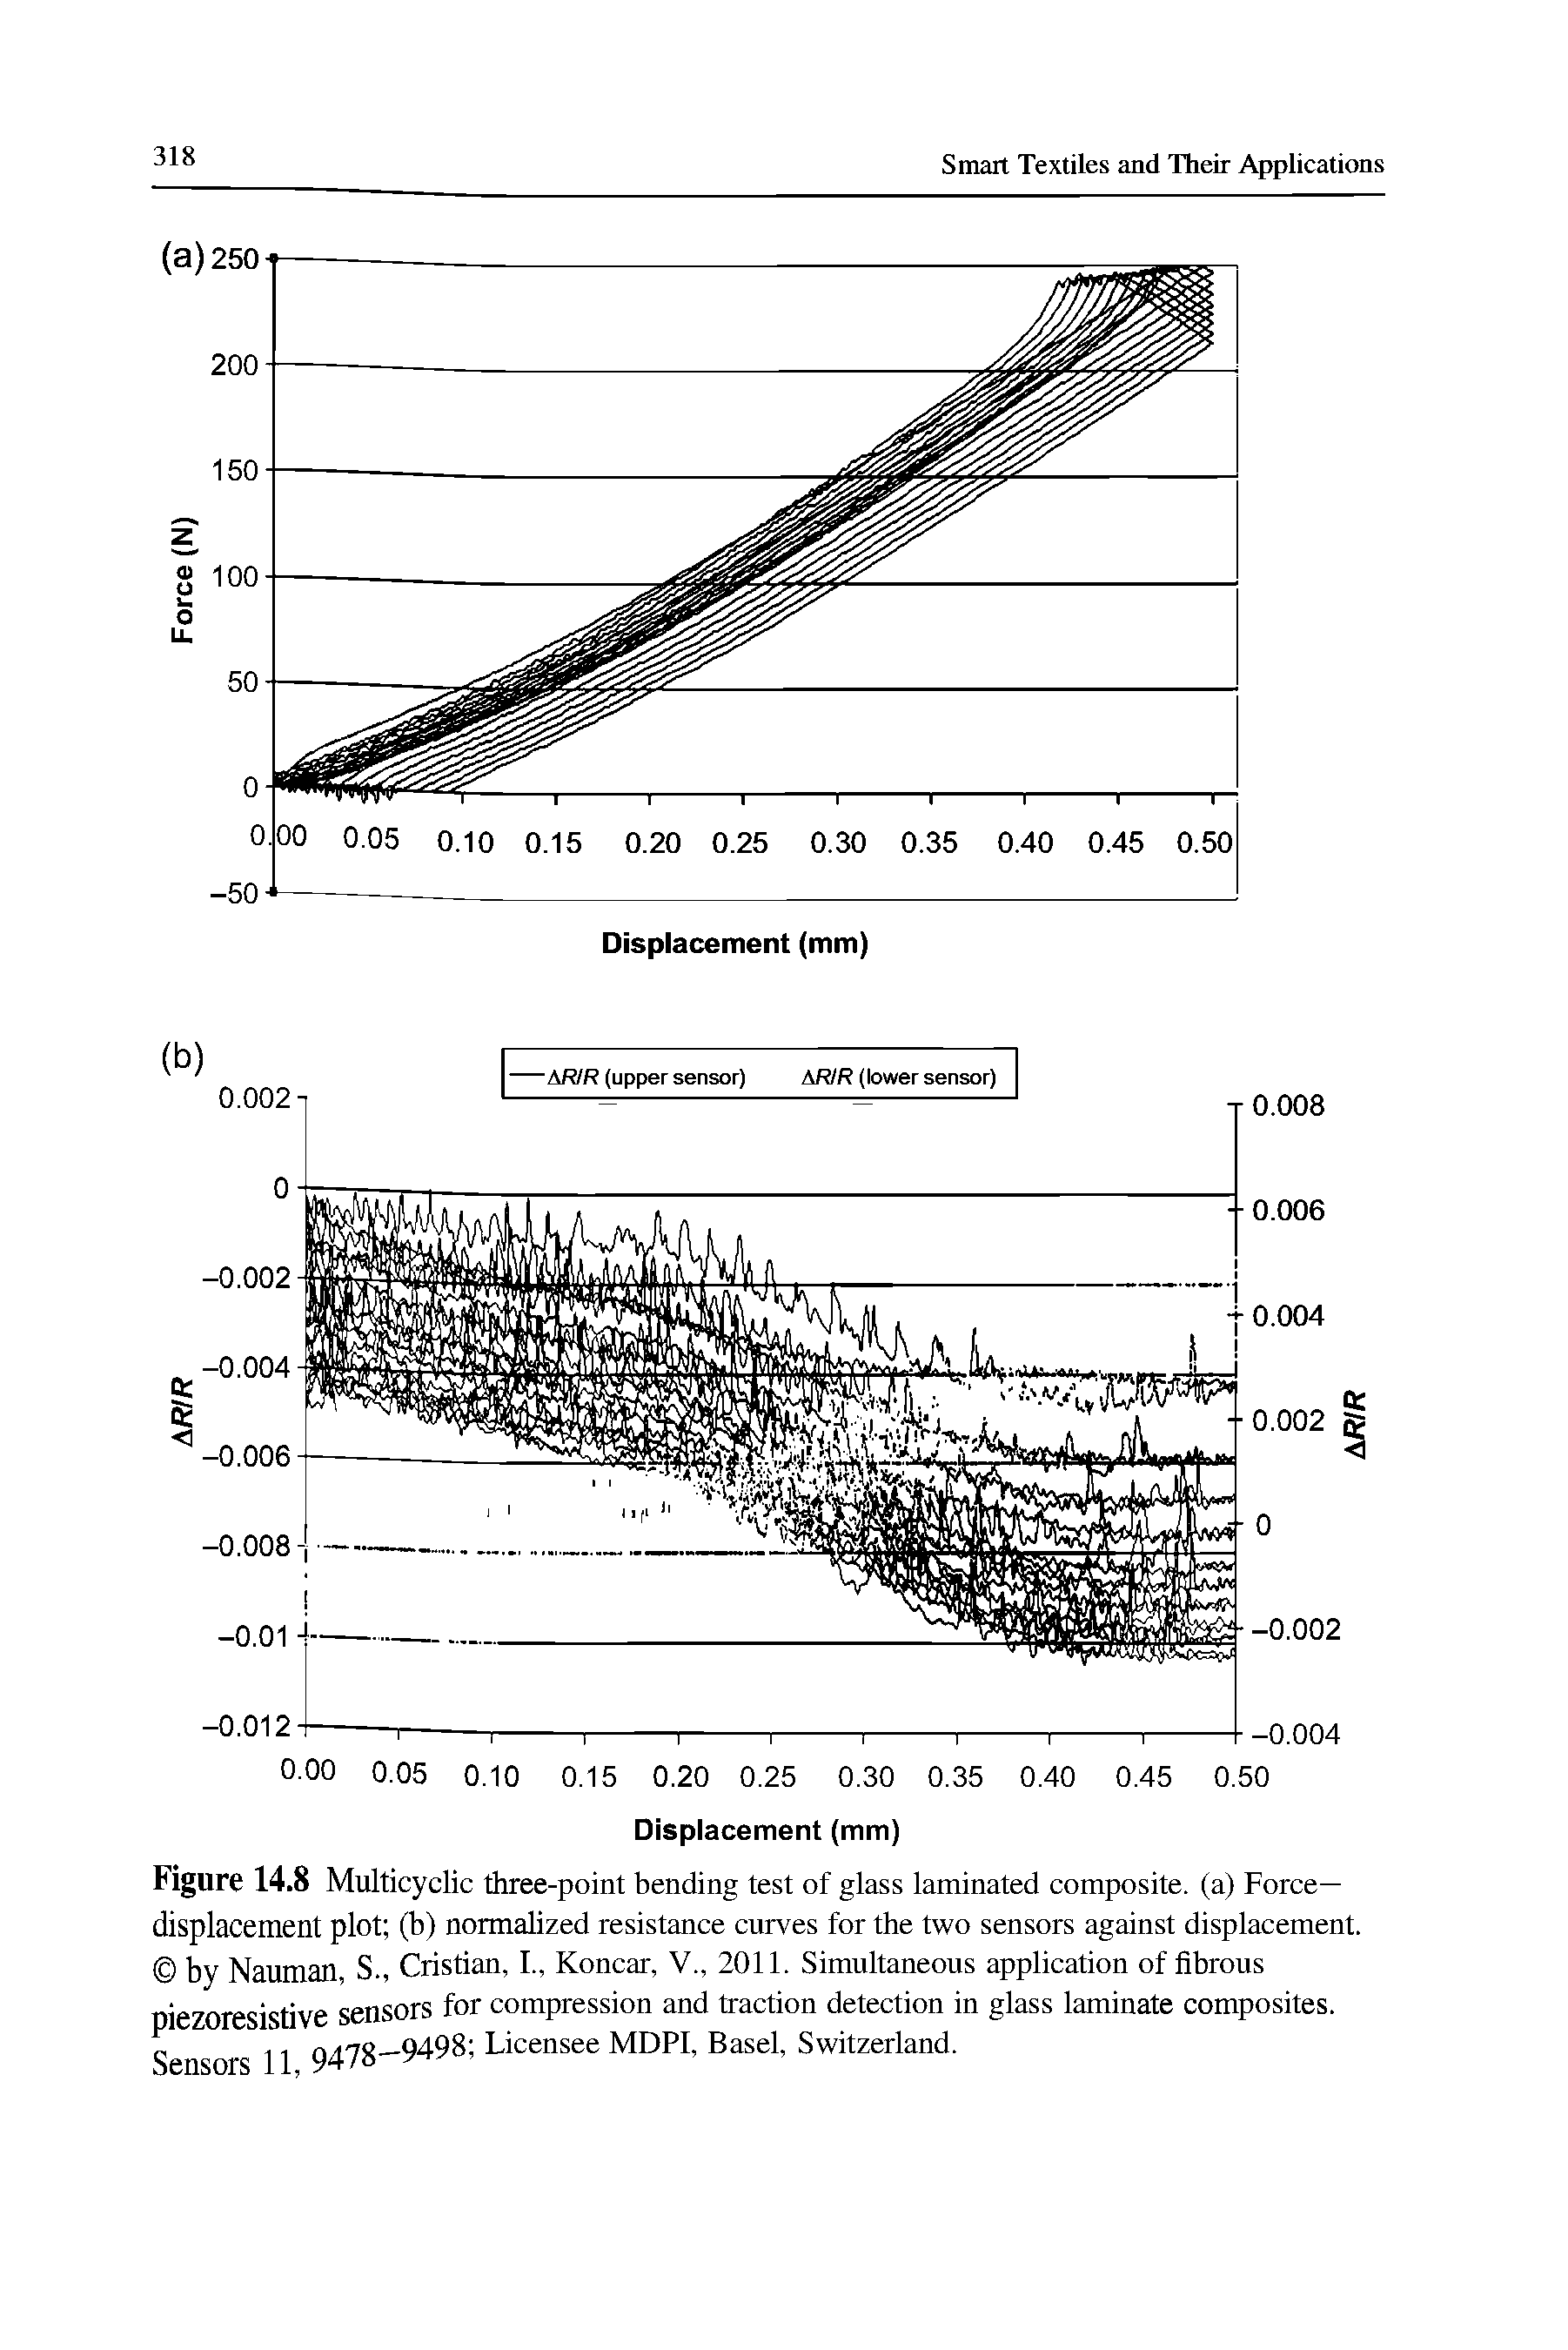 Figure 14.8 Multicyclic three-point bending test of glass laminated composite, (a) Force-displacement plot (b) normalized resistance curves for the two sensors against displacement by Nauman, S., Cristian, I., Koncar, V., 2011. Simultaneous application of fibrous piezoresistive sensors for compression and traction detection in glass laminate composites. Sensors 11 9478—9498 Licensee MDPl, Basel, Switzerland.